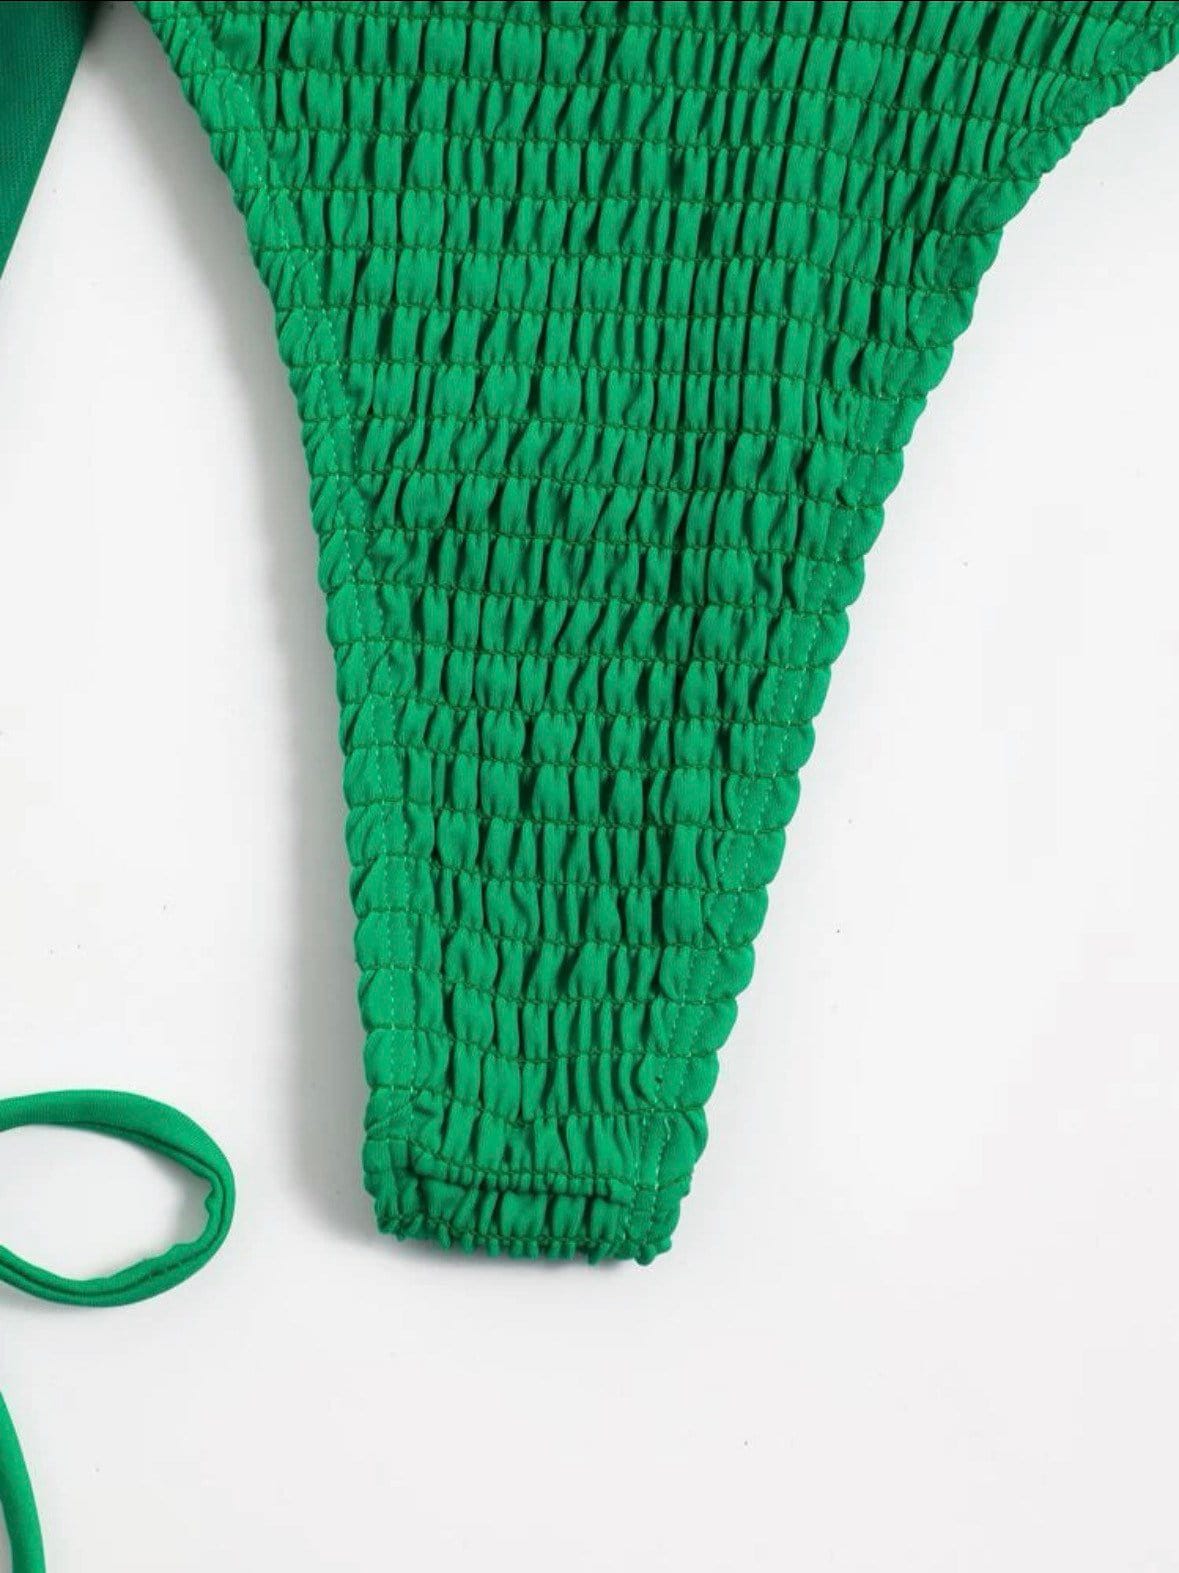 The Sexy SJ Green 4 Piece swim bikini with skirt cover up and long sleeve top and solid green smocked texture